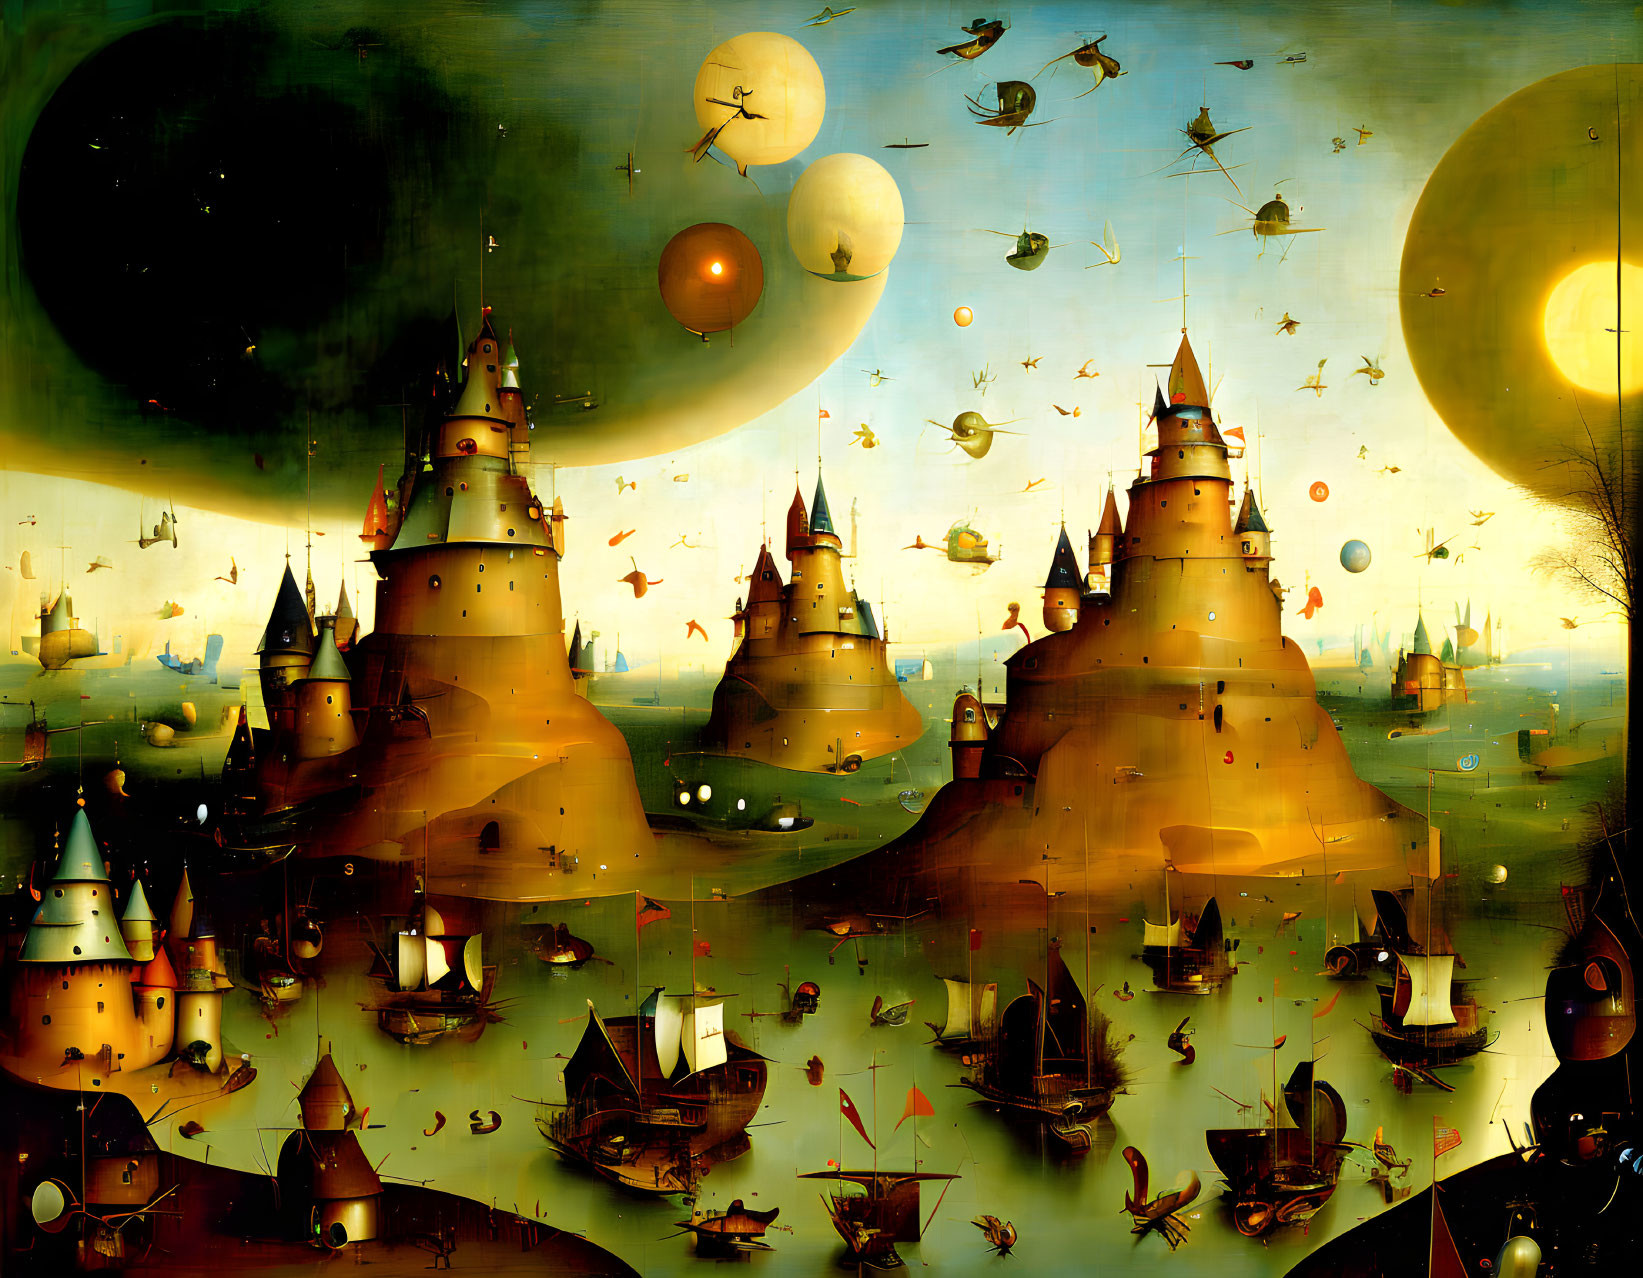 Whimsical surreal landscape with castles, floating bodies, and flying fish